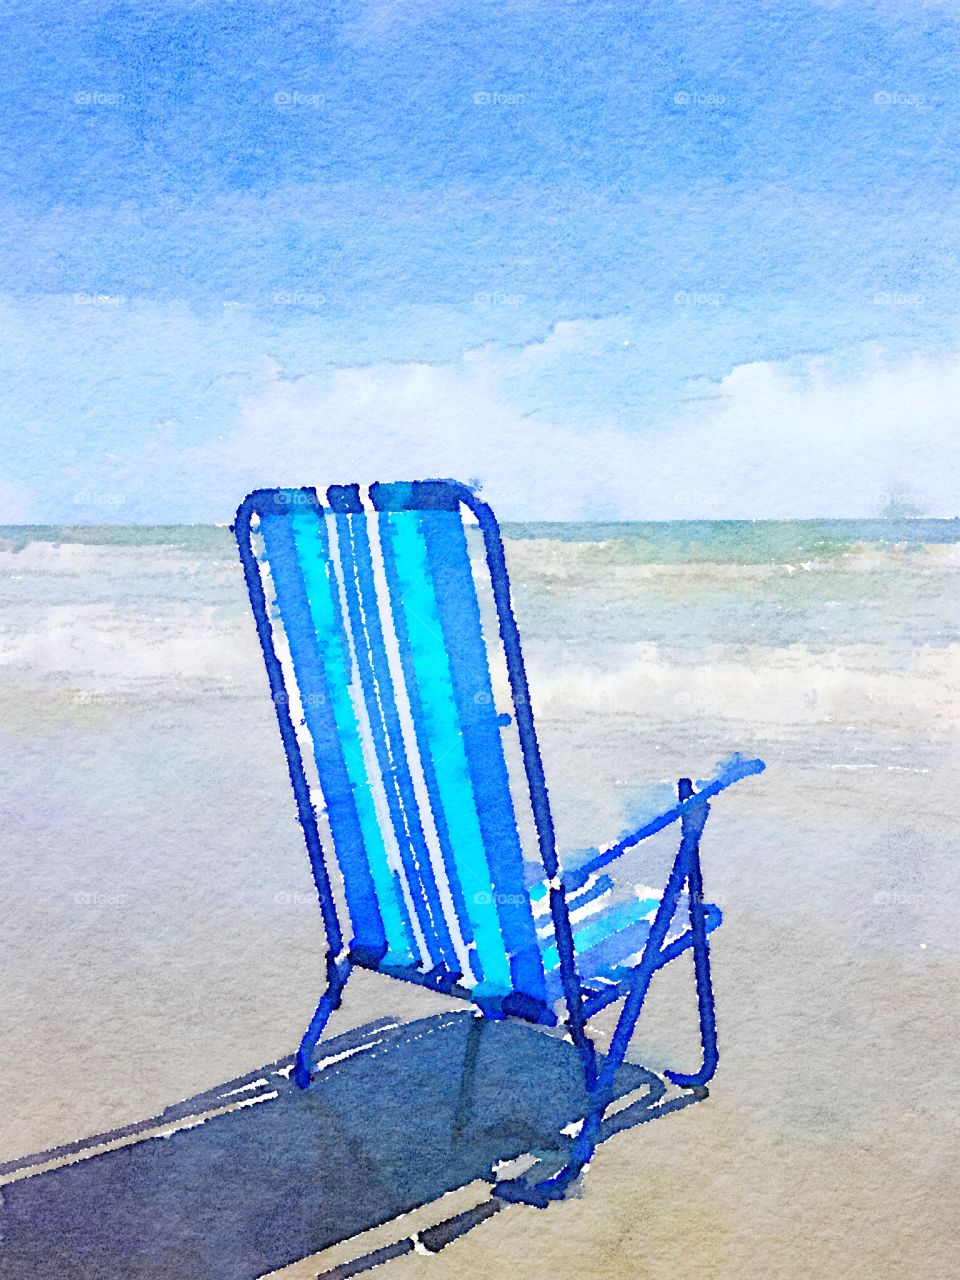 My painting of a beach chair.